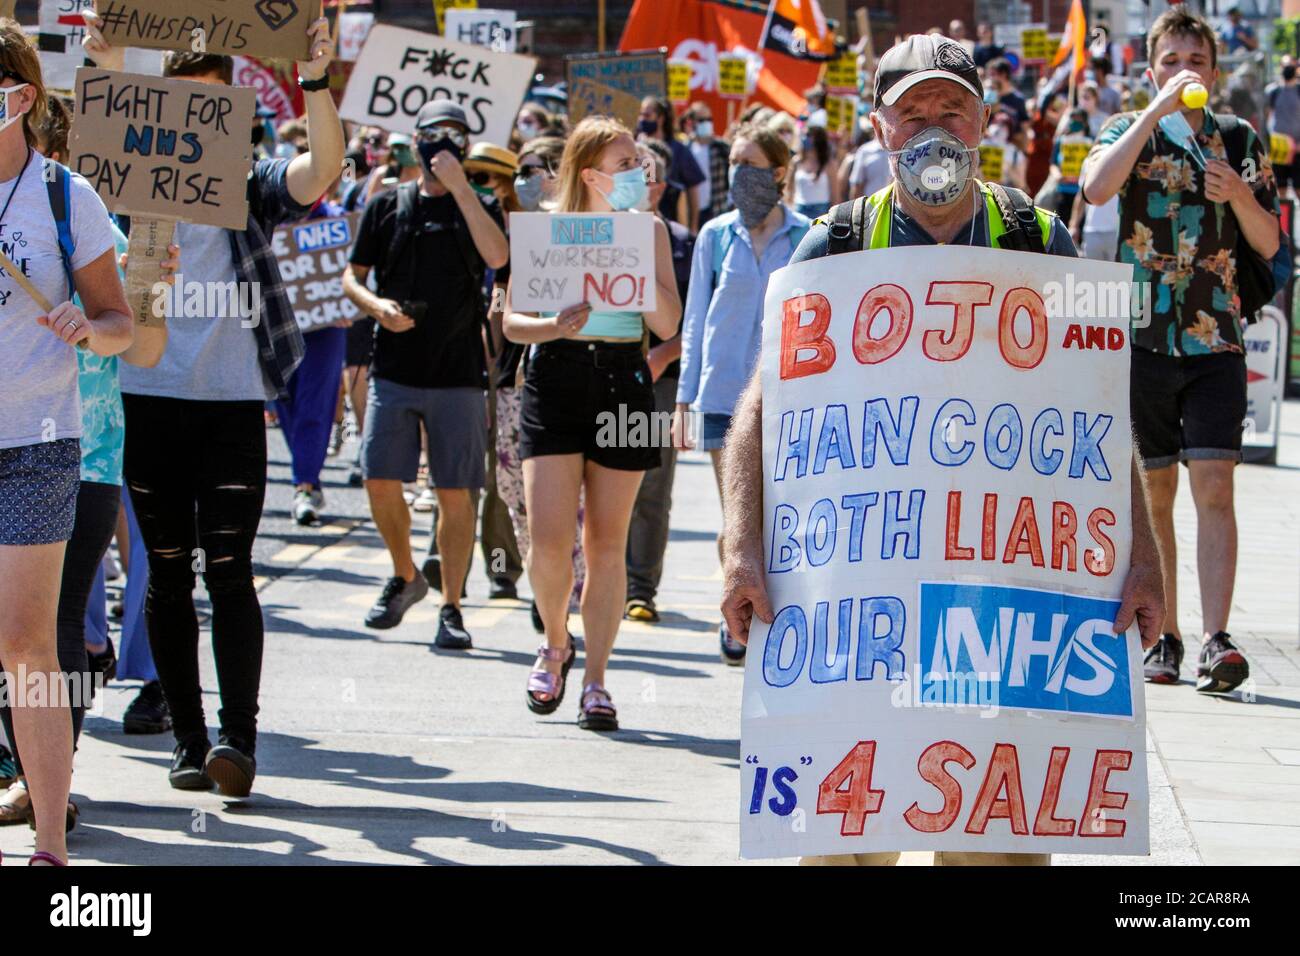 Bristol, UK. 8th August, 2020. NHS staff and members of the public are pictured as they march through Bristol to campaign for ‘pay justice’.  Thousands of NHS workers in towns and cities around the UK took part in socially distanced demonstrations in order to vent their anger that despite all their efforts during the pandemic NHS staff have been ignored and excluded from recently announced public sector pay rises. Credit: Lynchpics/Alamy Live News Stock Photo